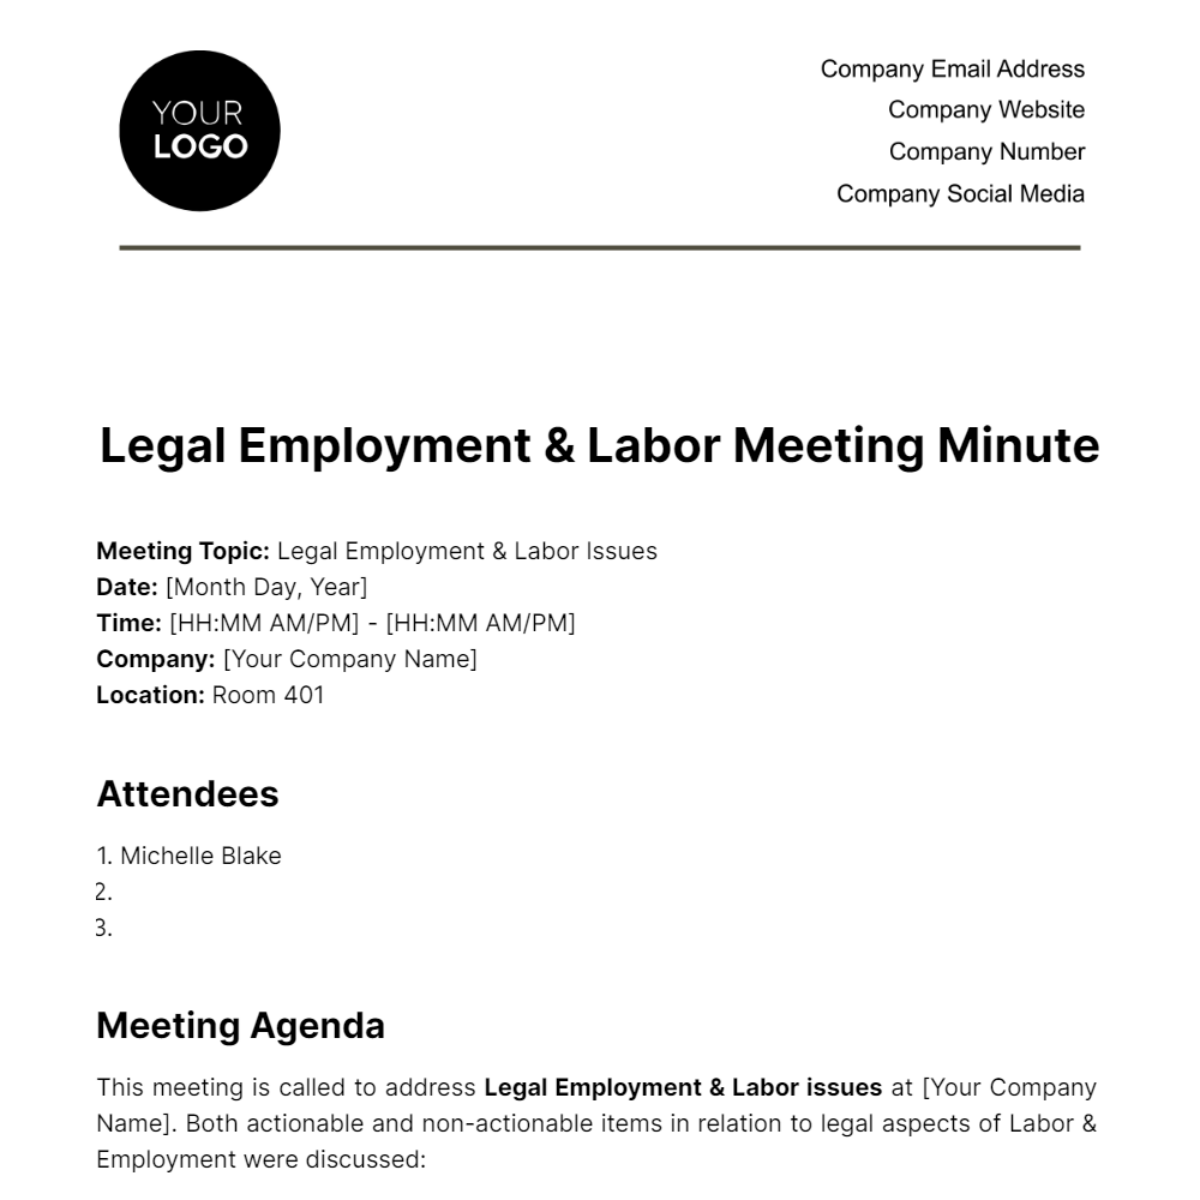 Free Legal Employment & Labor Meeting Minute Template